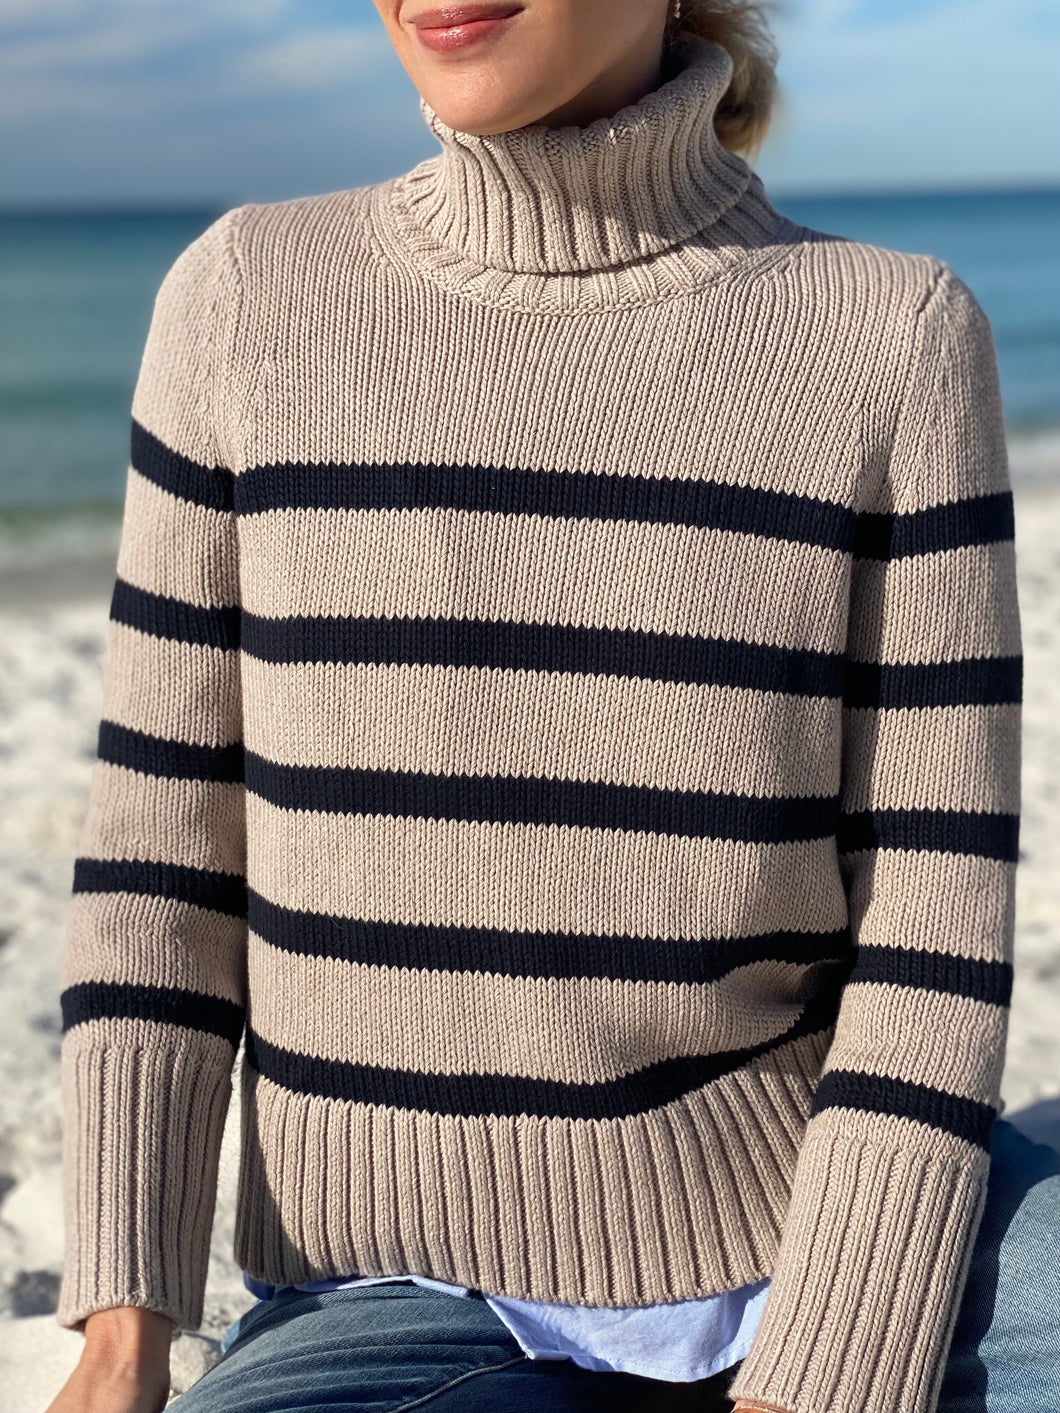 State of Cotton Wynn Cotton Sweater in Oatmeal and Navy